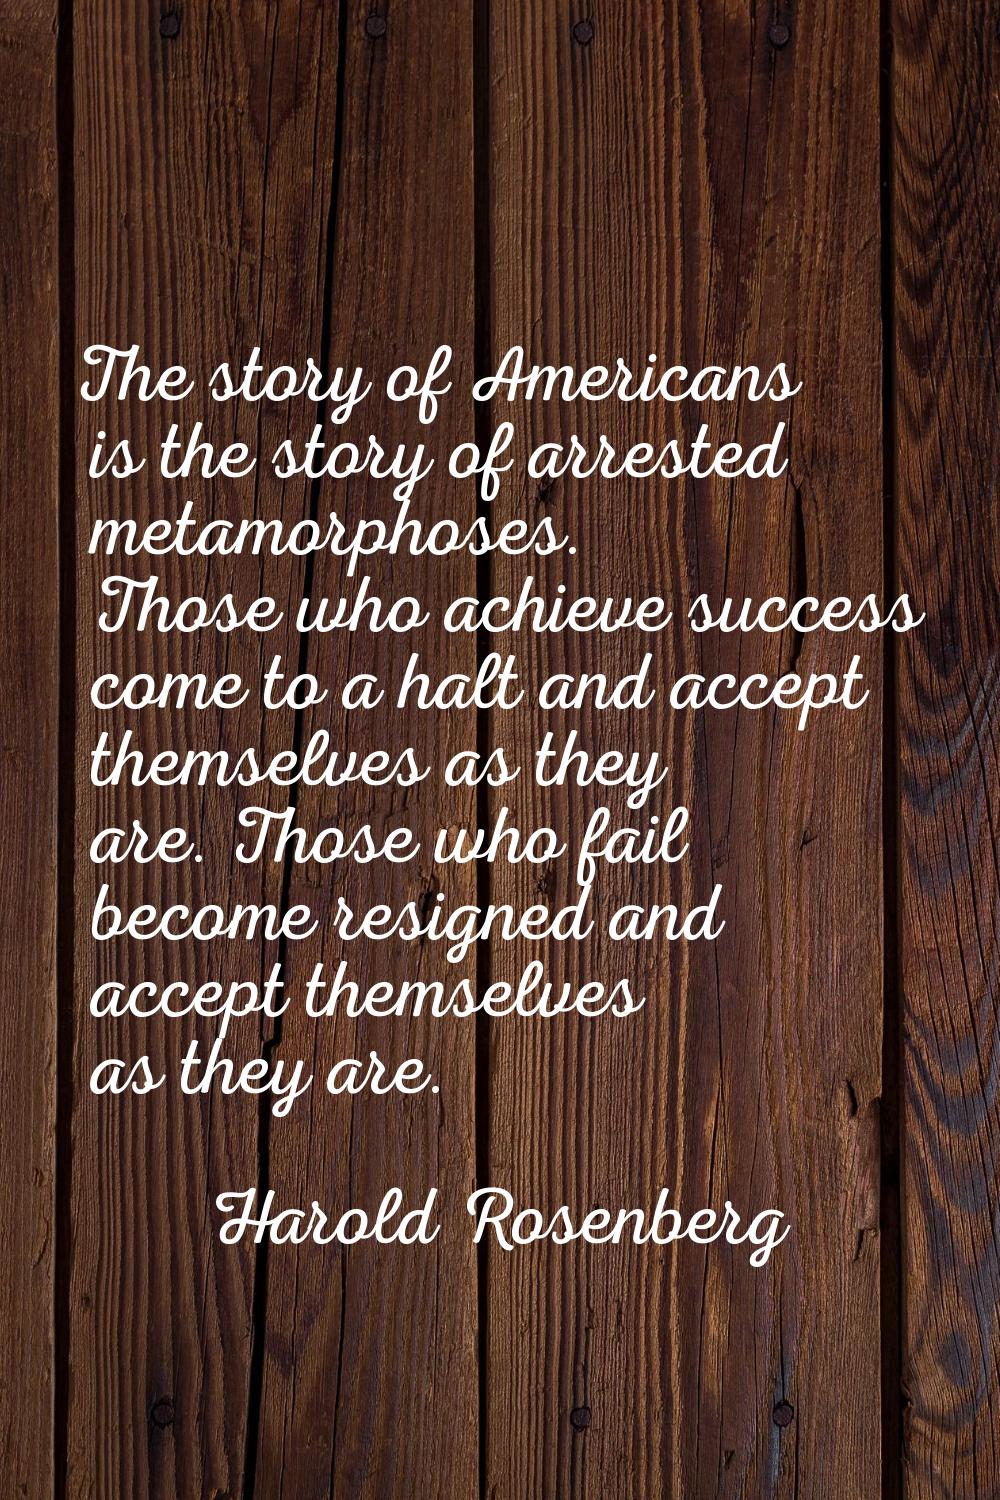 The story of Americans is the story of arrested metamorphoses. Those who achieve success come to a 